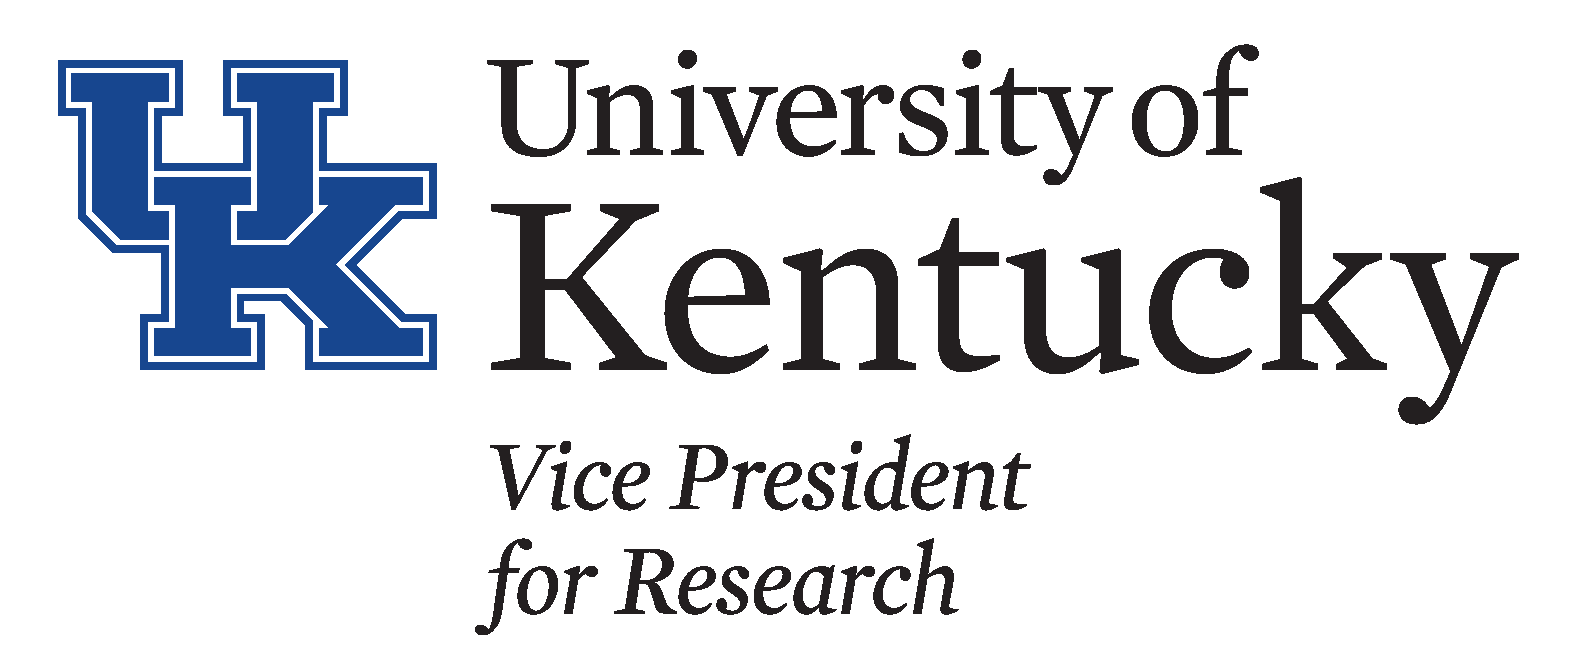 University of Kentucky Vice President for Research